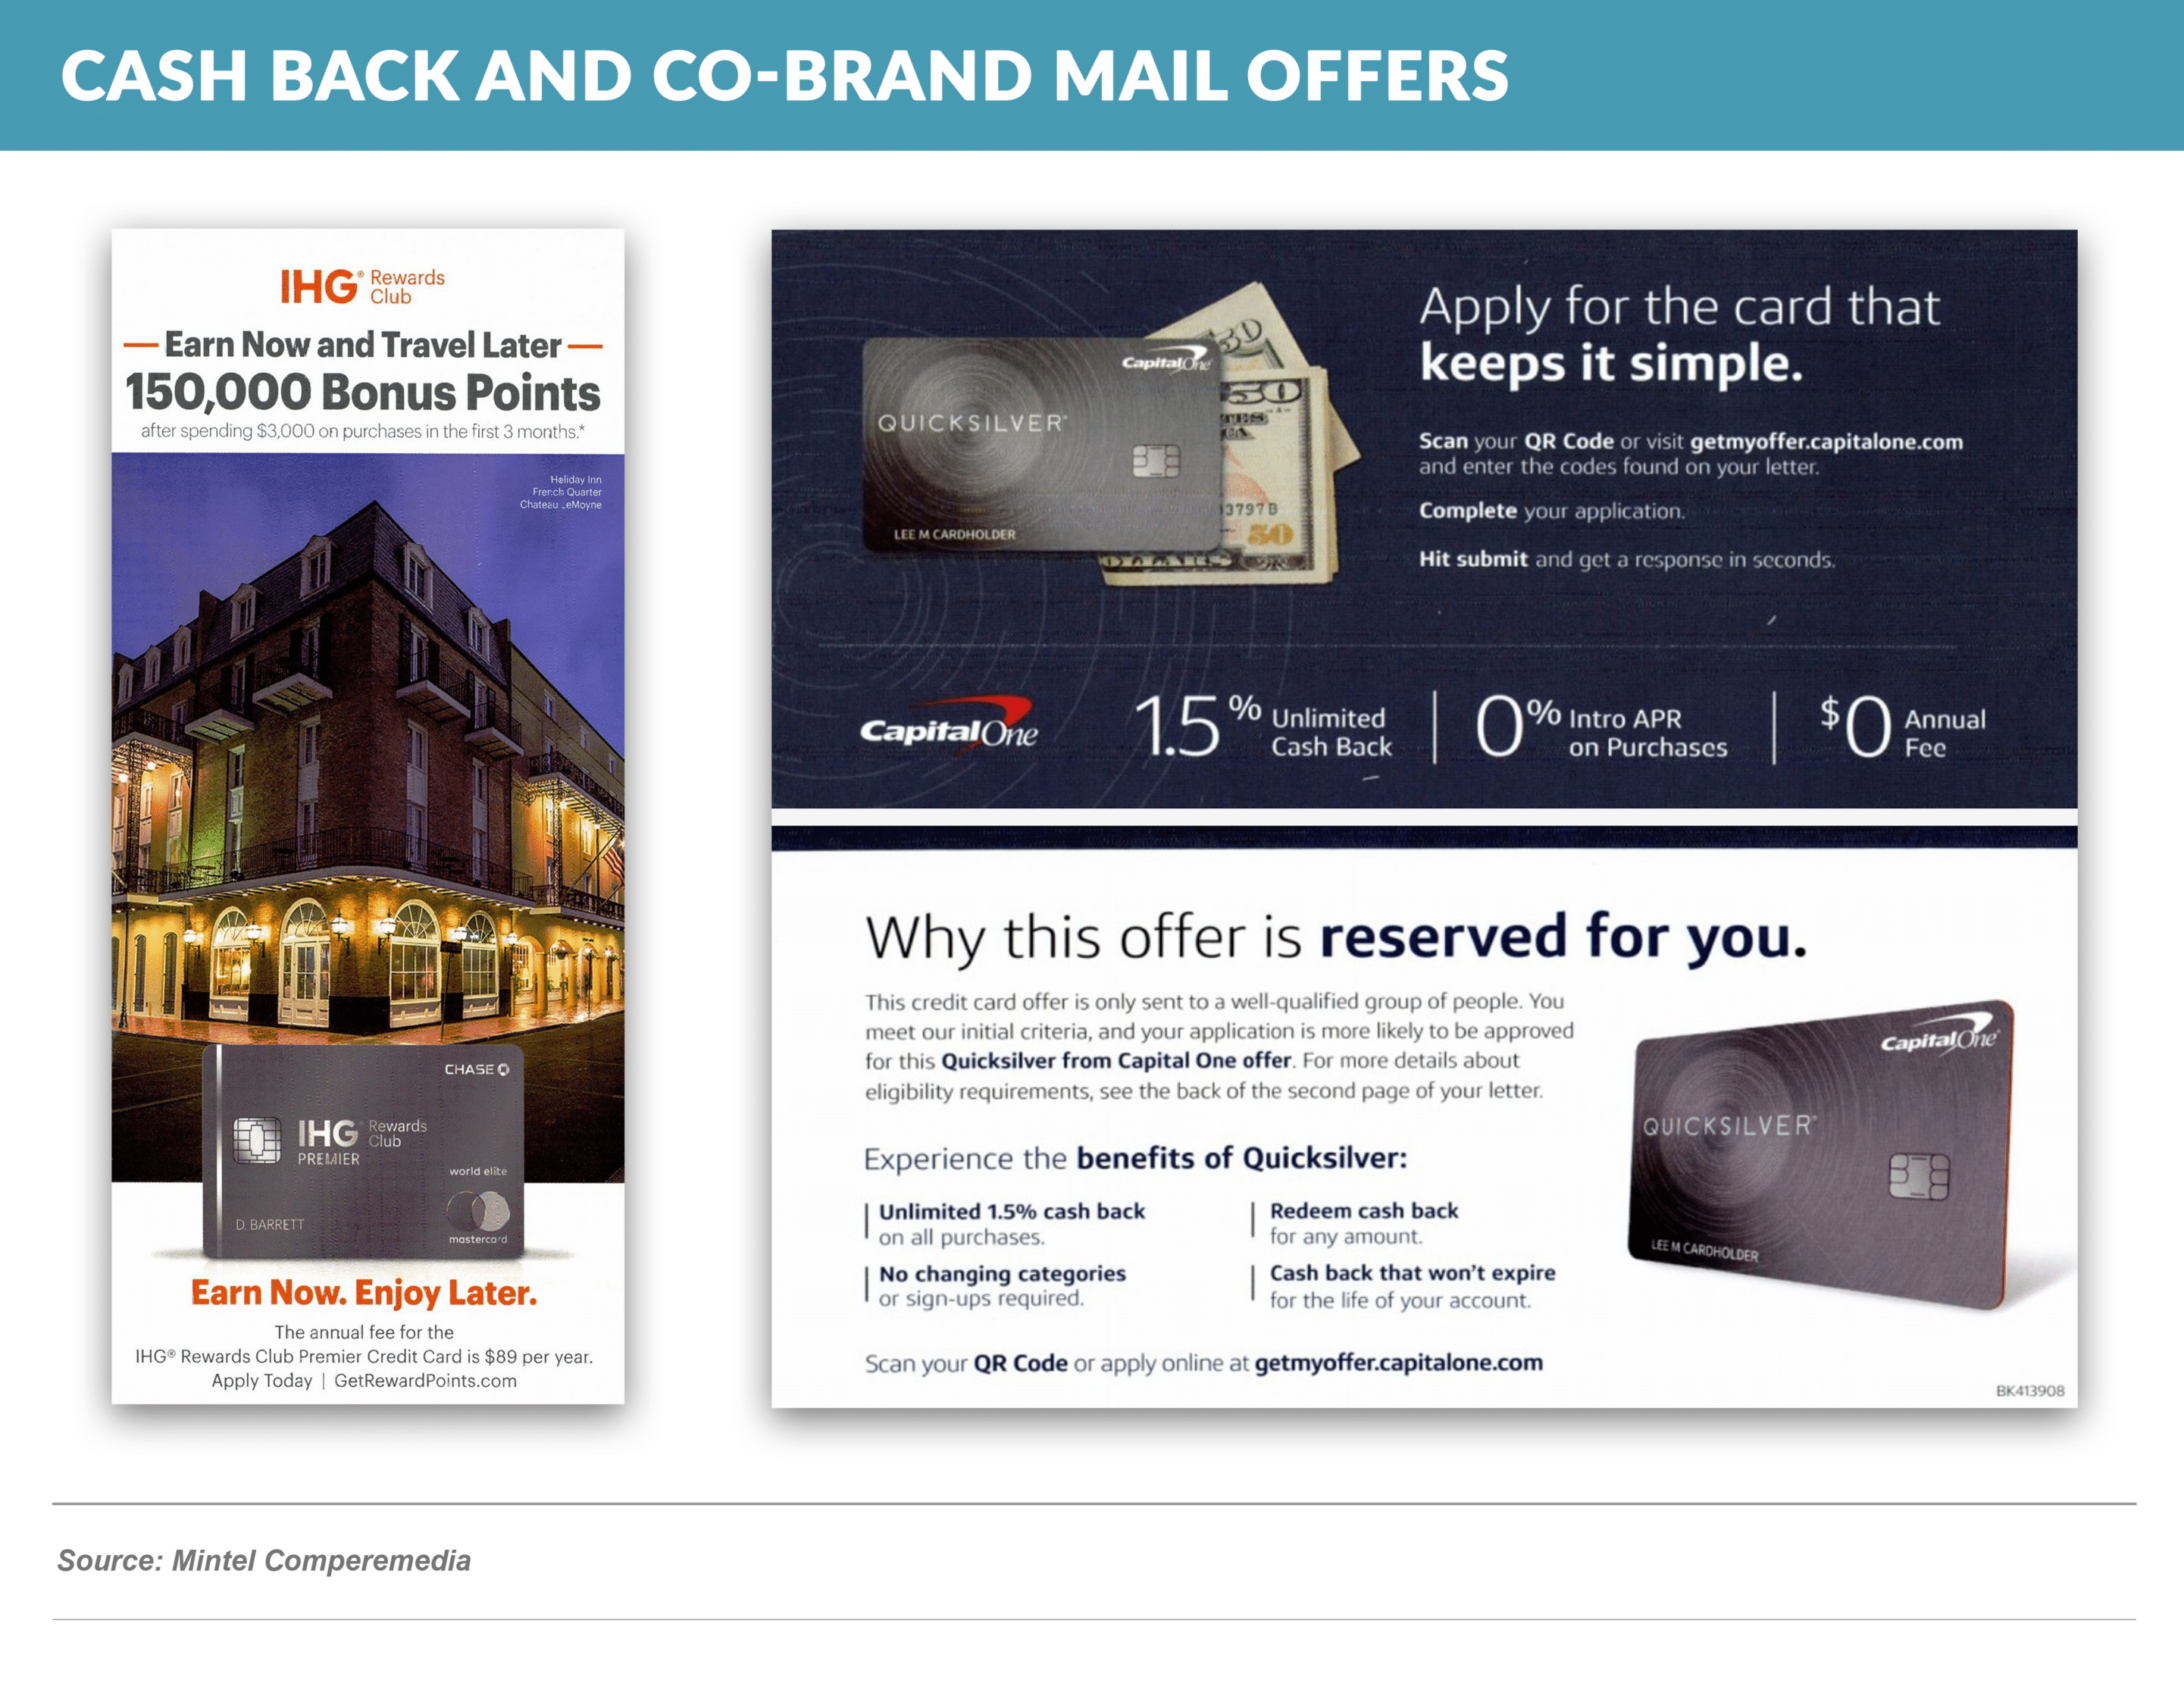 Cash Back and Co-brand Mail Offers (2)